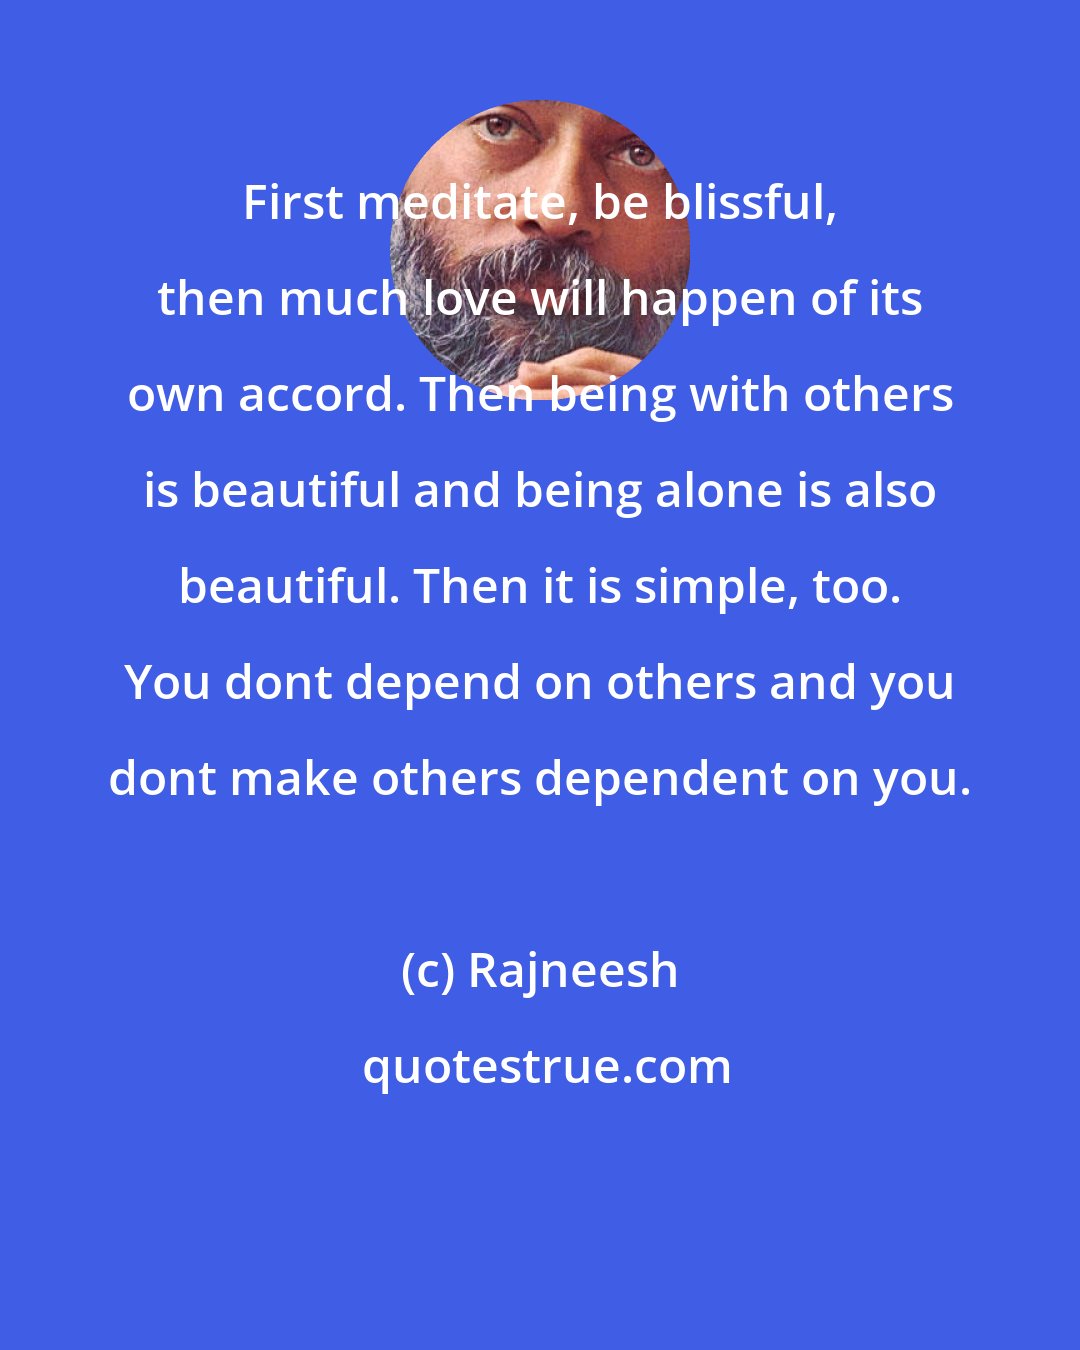 Rajneesh: First meditate, be blissful, then much love will happen of its own accord. Then being with others is beautiful and being alone is also beautiful. Then it is simple, too. You dont depend on others and you dont make others dependent on you.